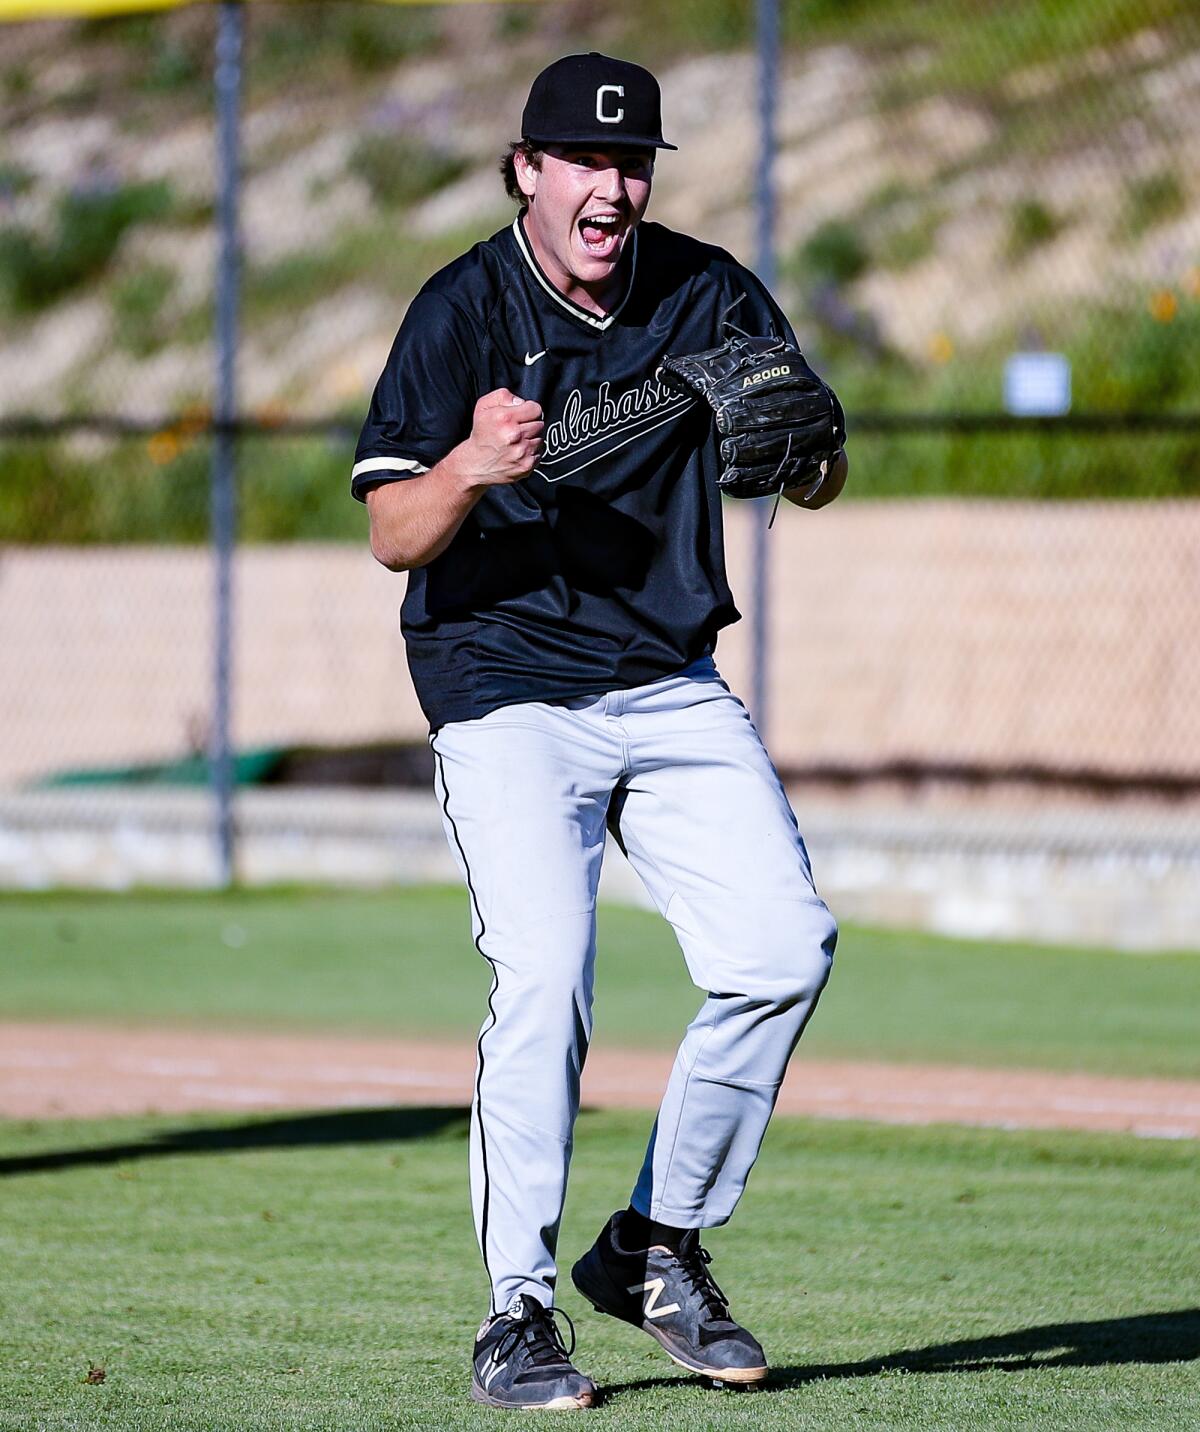 Jordan Kingston of Calabasas celebrates after throwing a complete game to hand Westlake its first defeat 3-2.